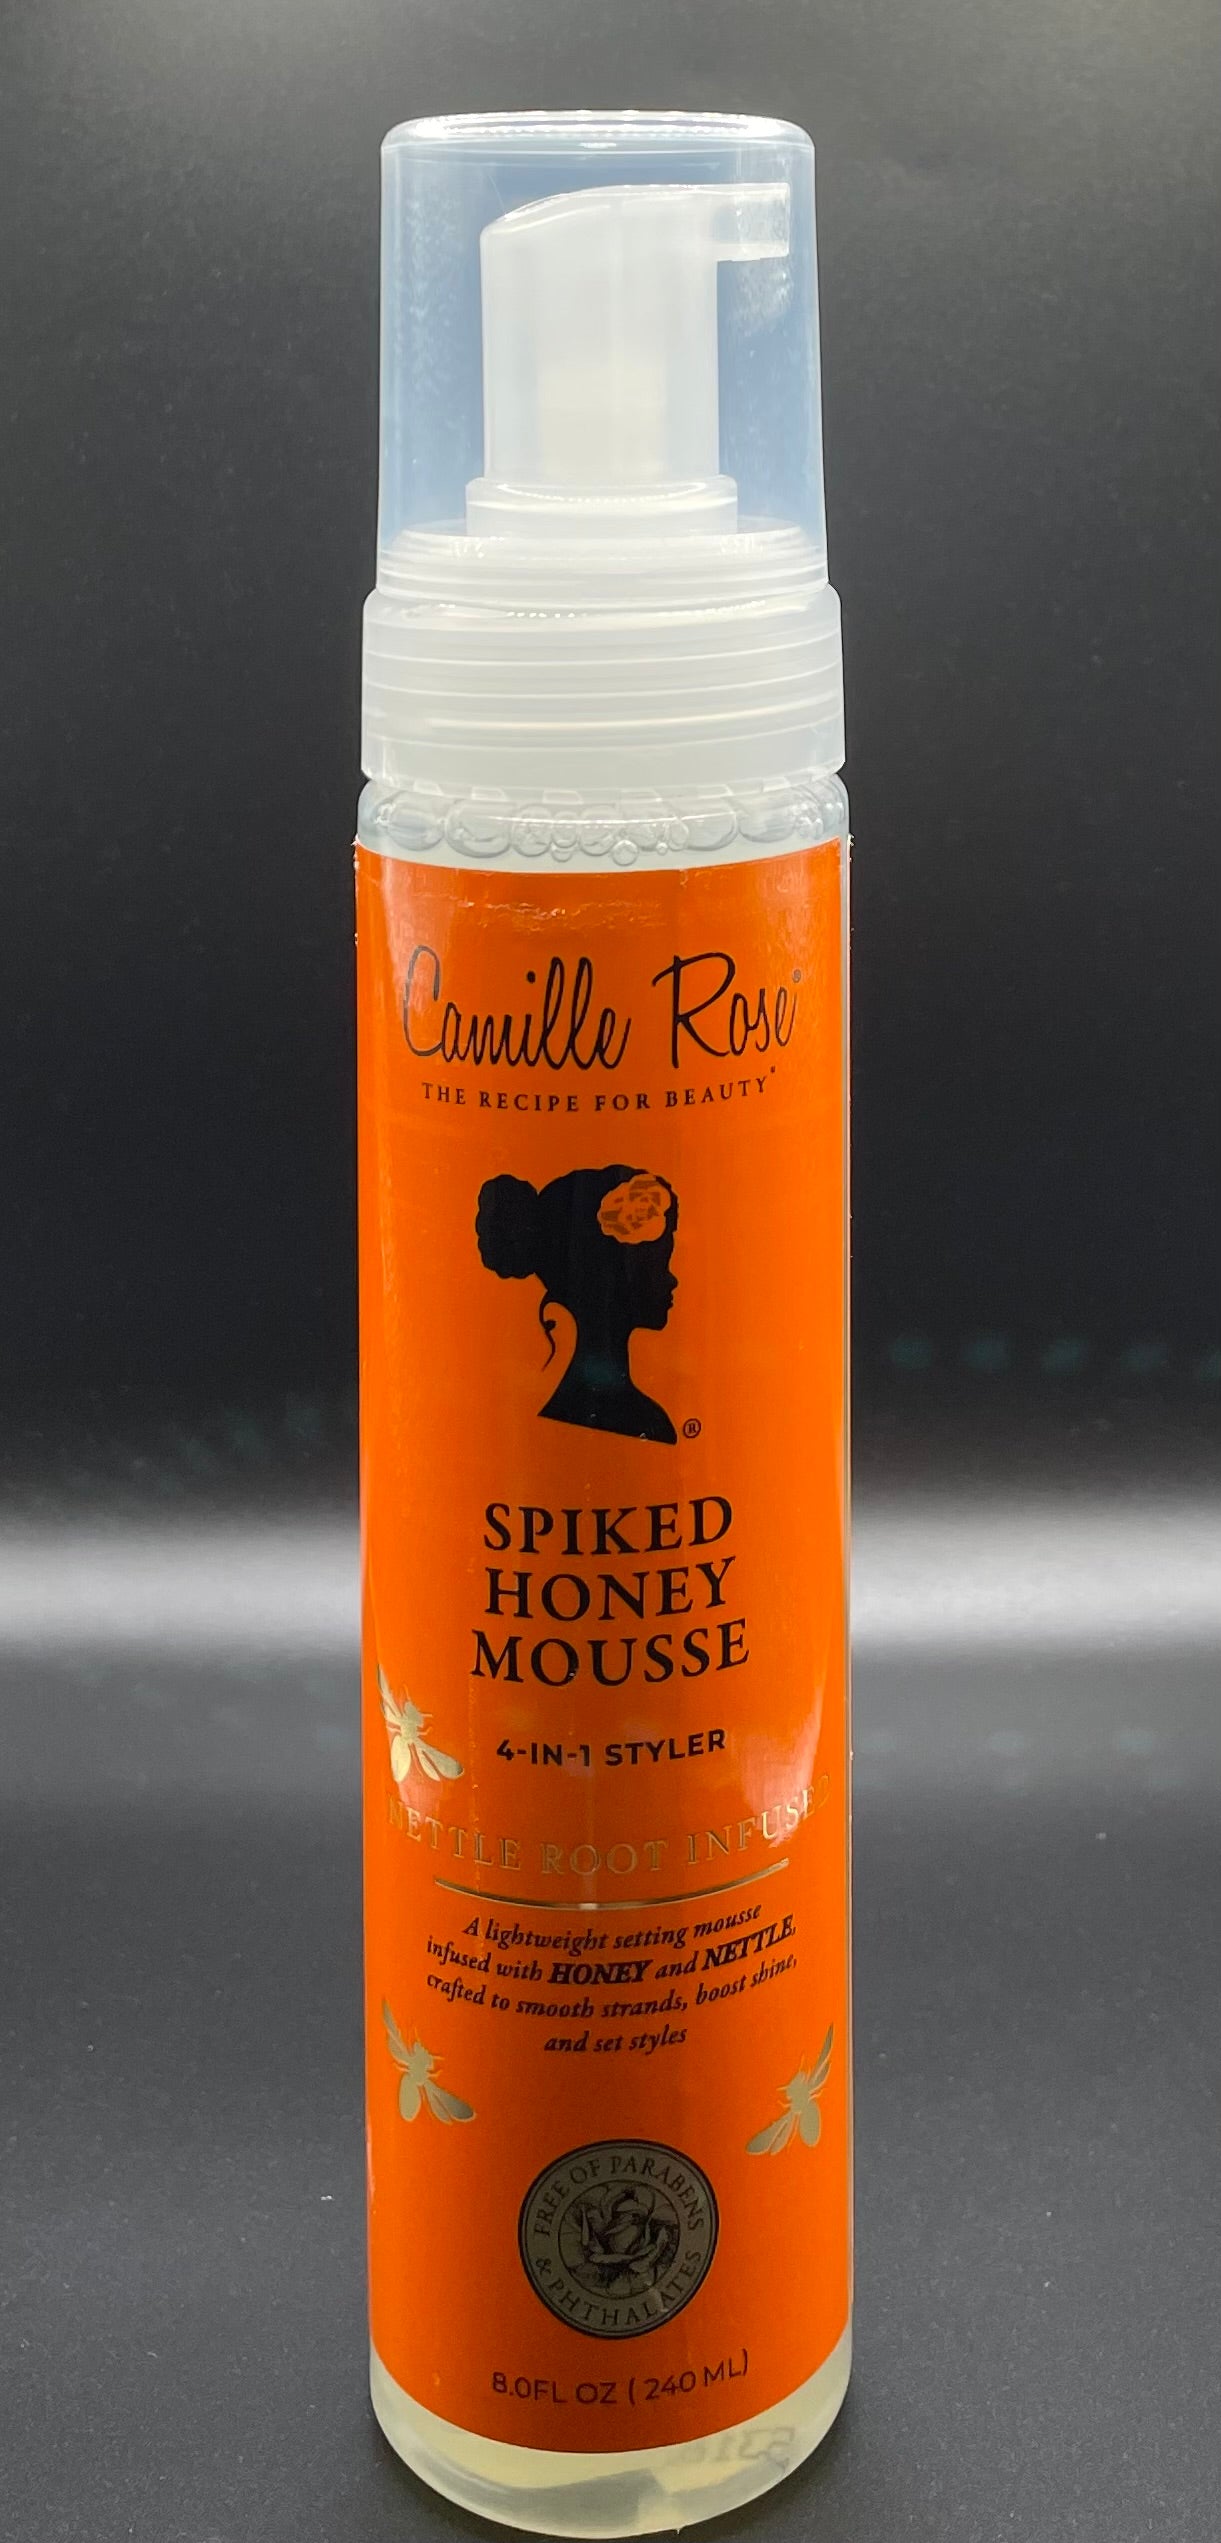 Camille Rose-Spiked Honey Mousse 4-in-1 Styler